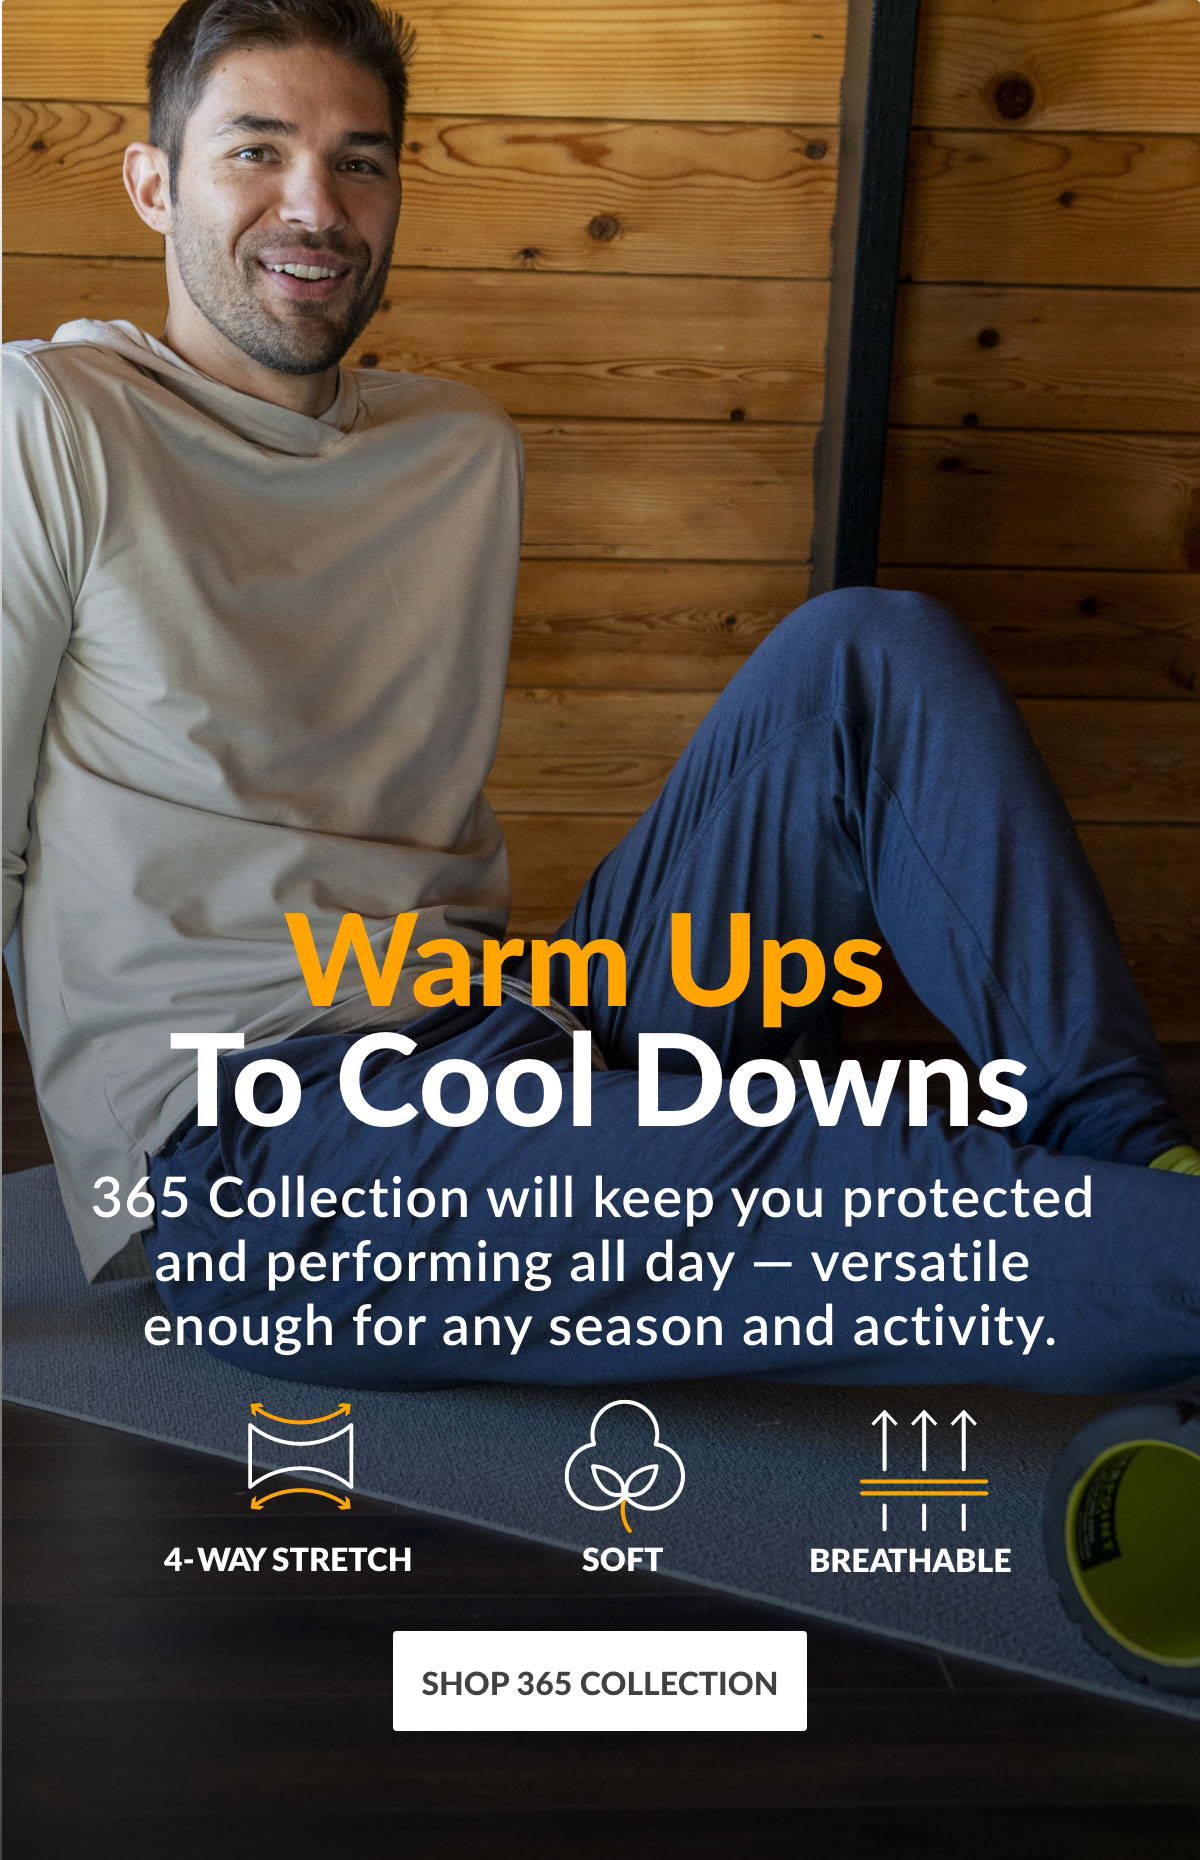 Warm Ups to Cool Downs - 365 Collection will keep you protected and performing all day - versatile enough for any season and activity - Shop 365 Collection